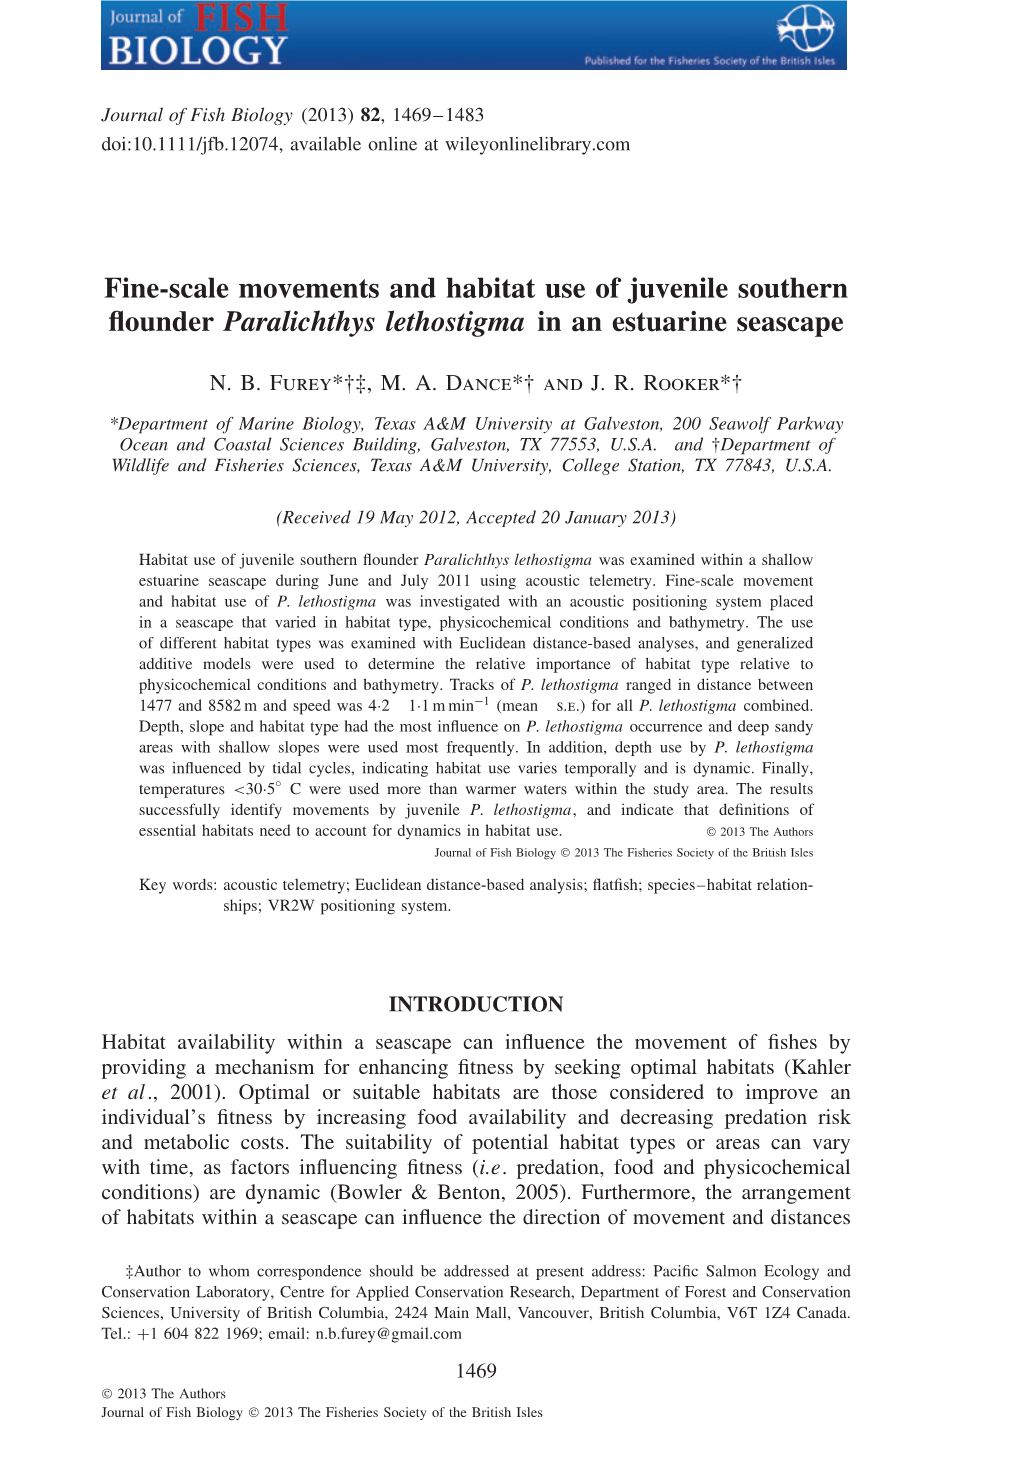 Fine-Scale Movements and Habitat Use of Juvenile Southern Flounder